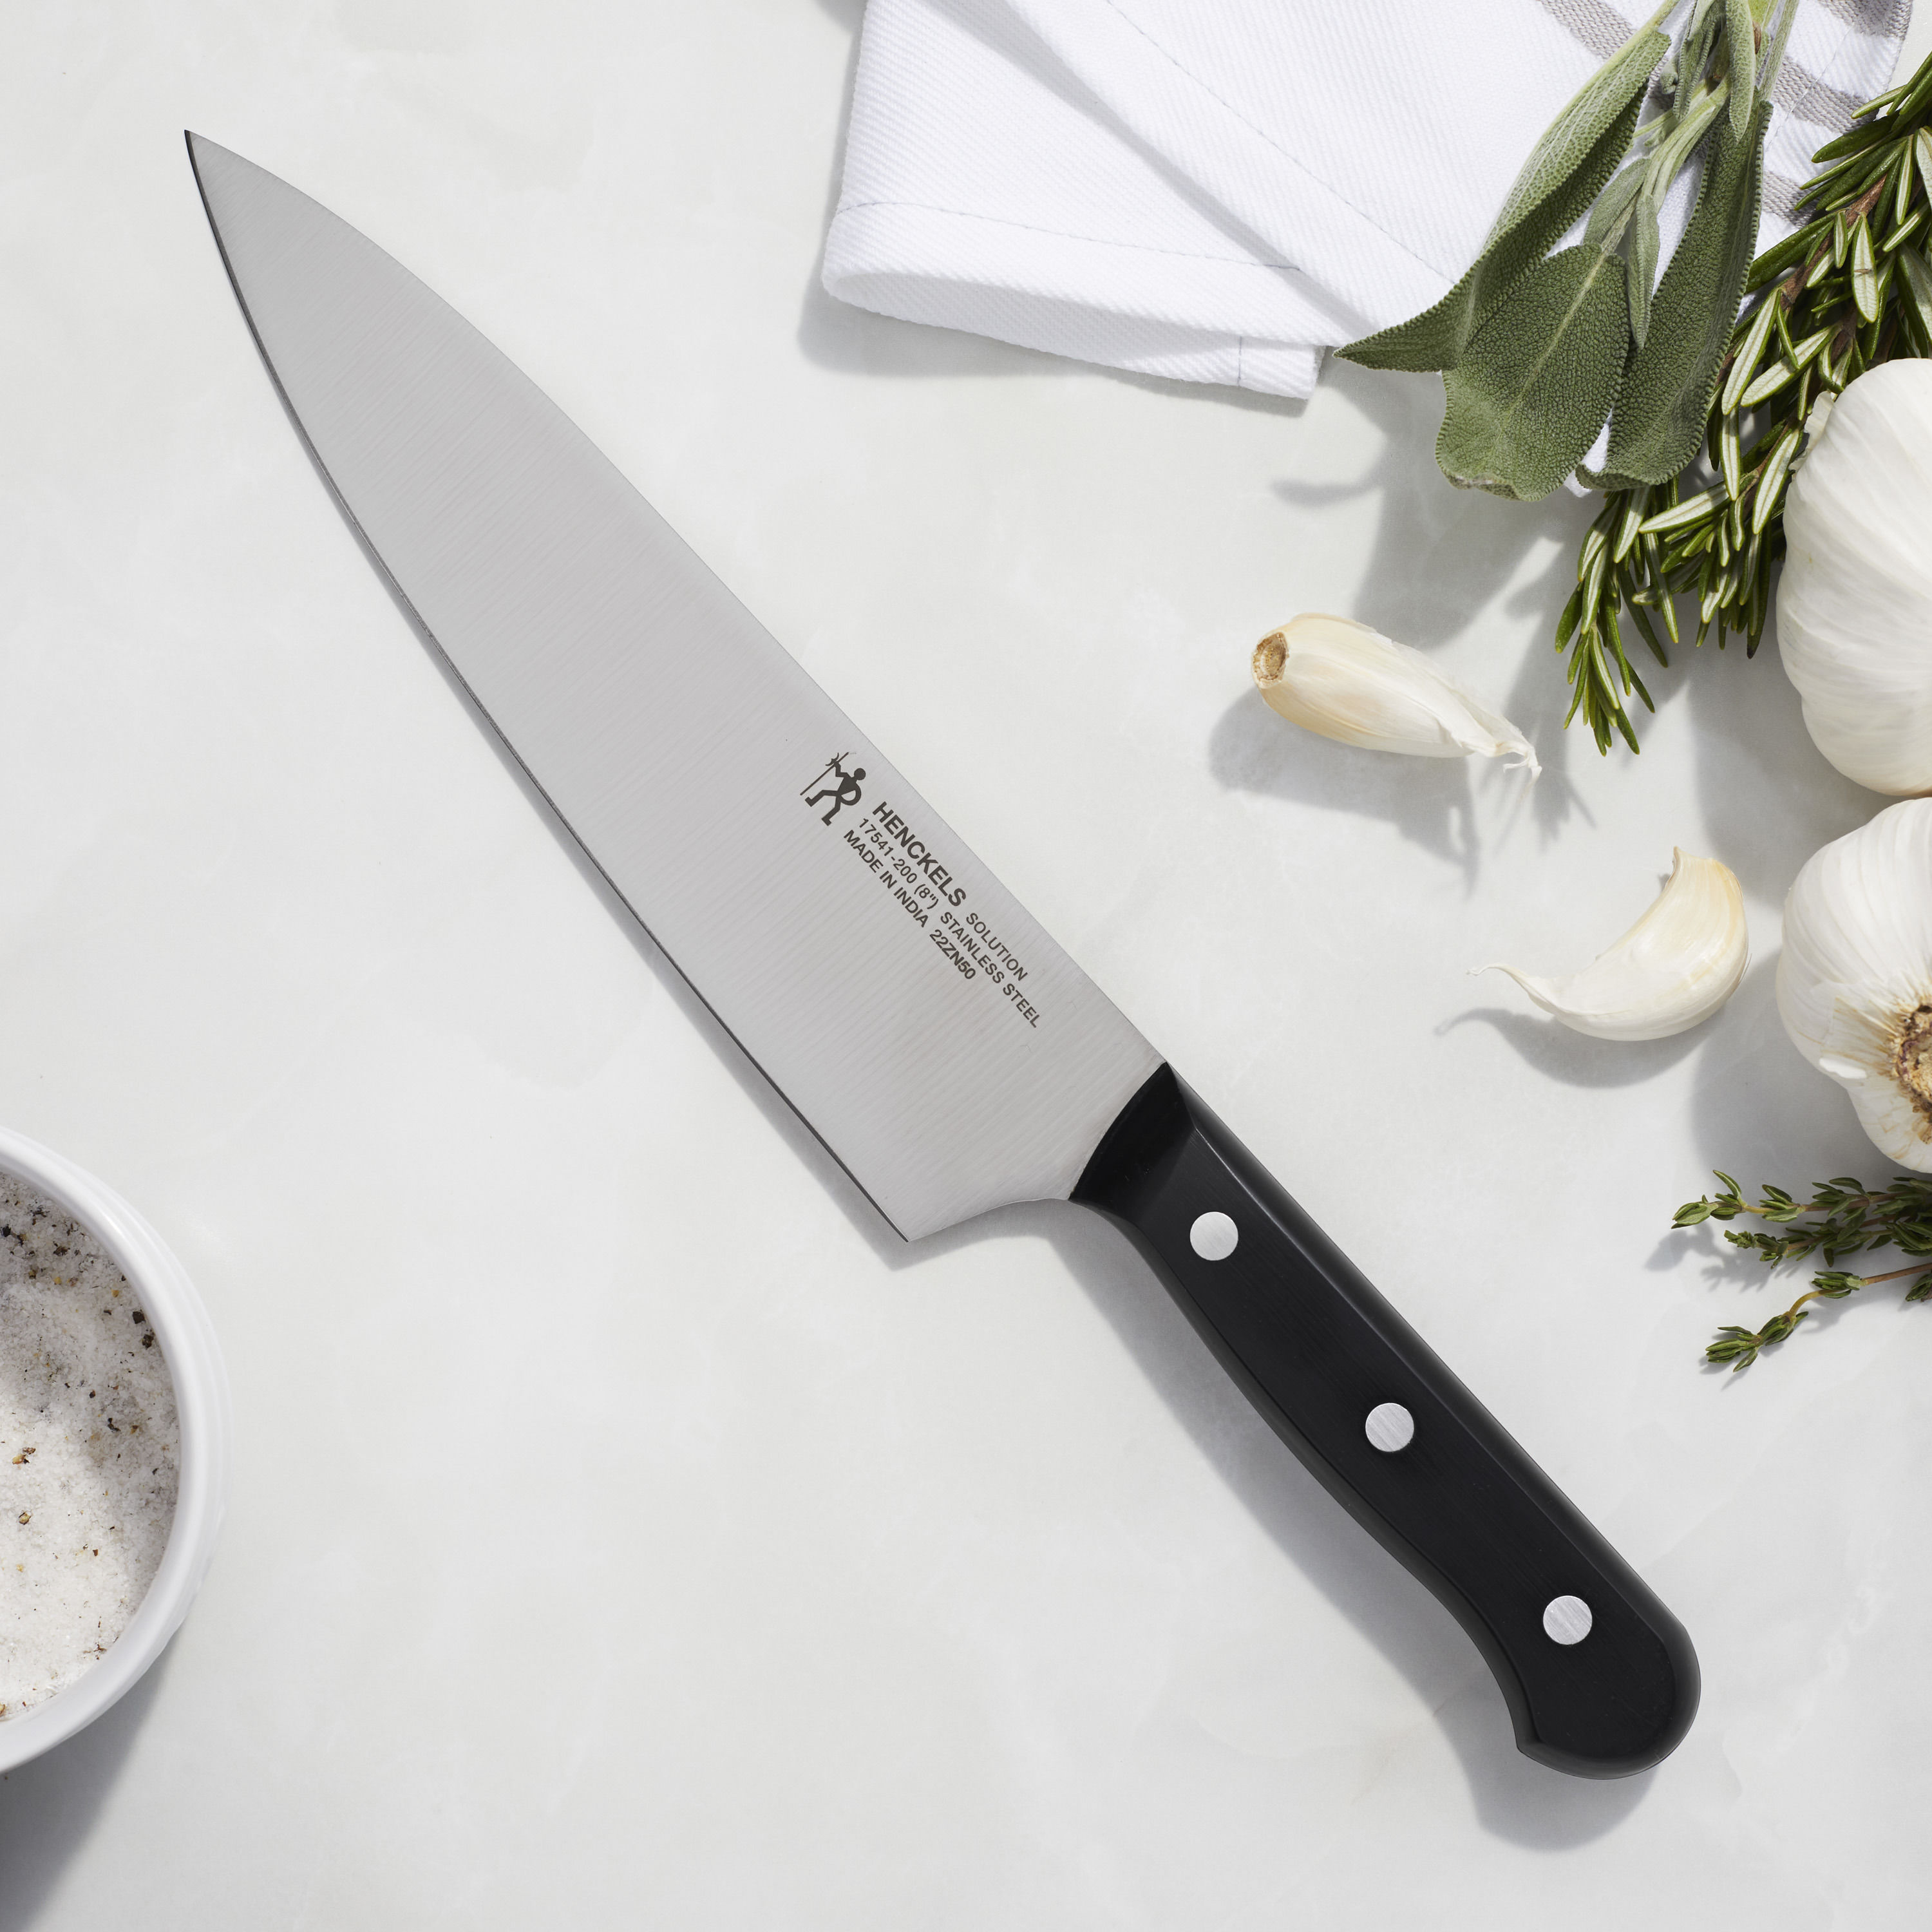  Made In Cookware - 8 Chef Knife France - Full Tang